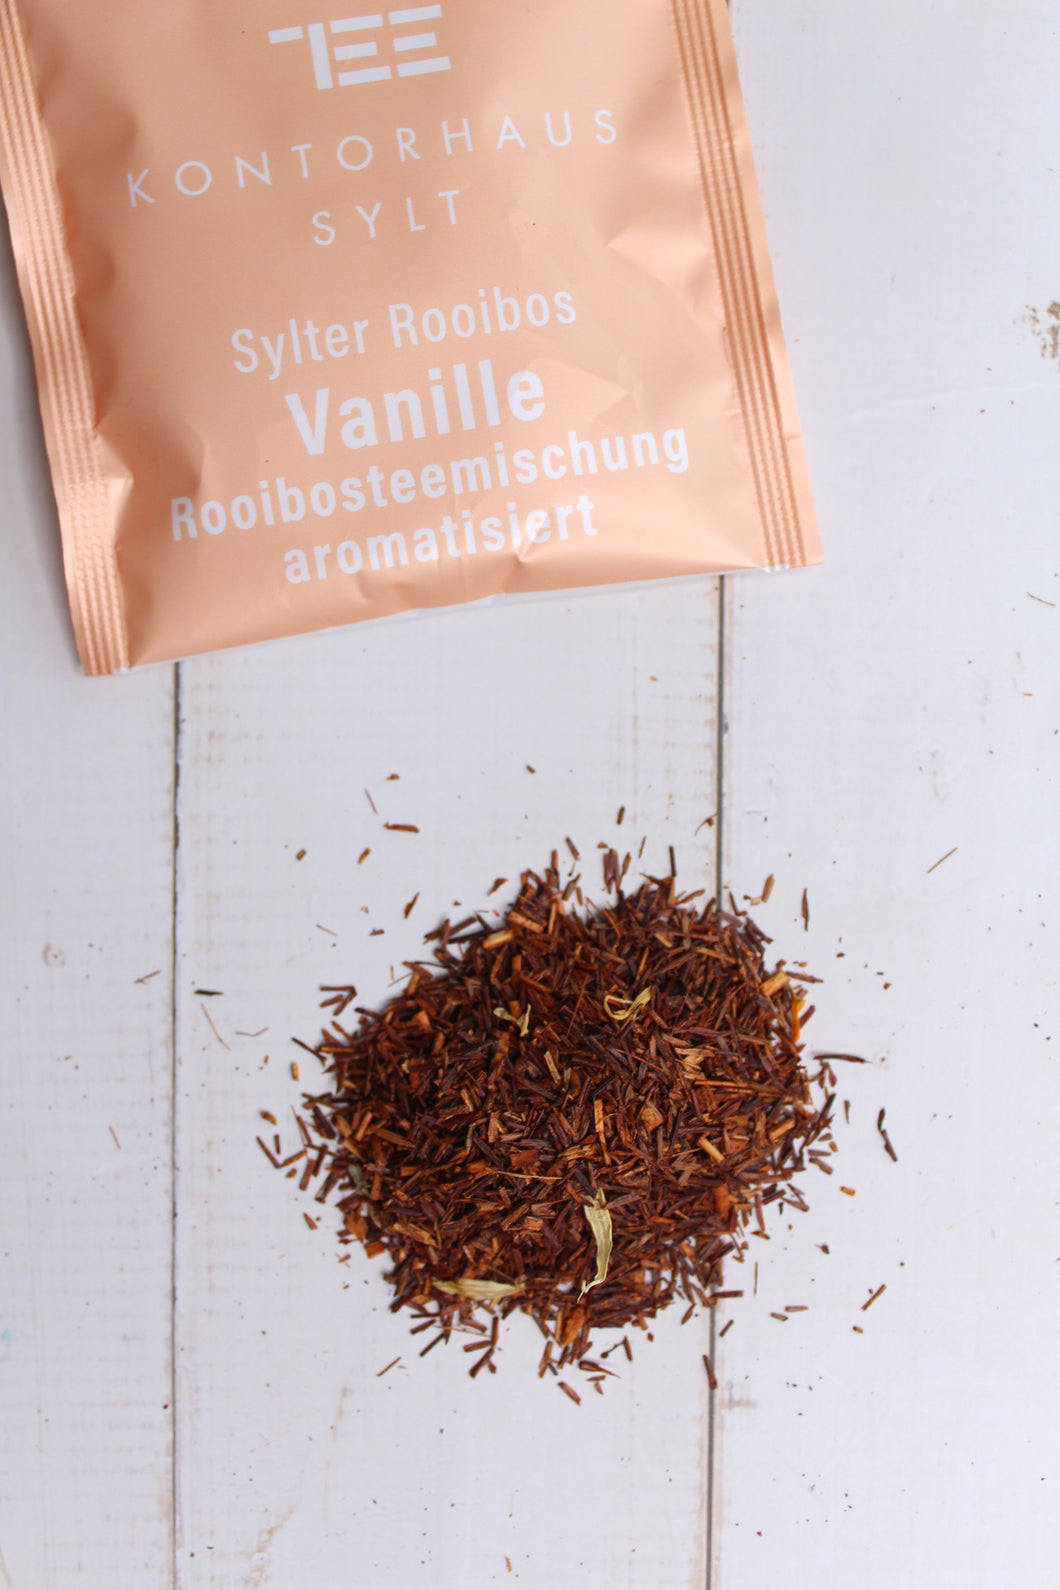 Sylter Rooibos No. 18 / Vanille